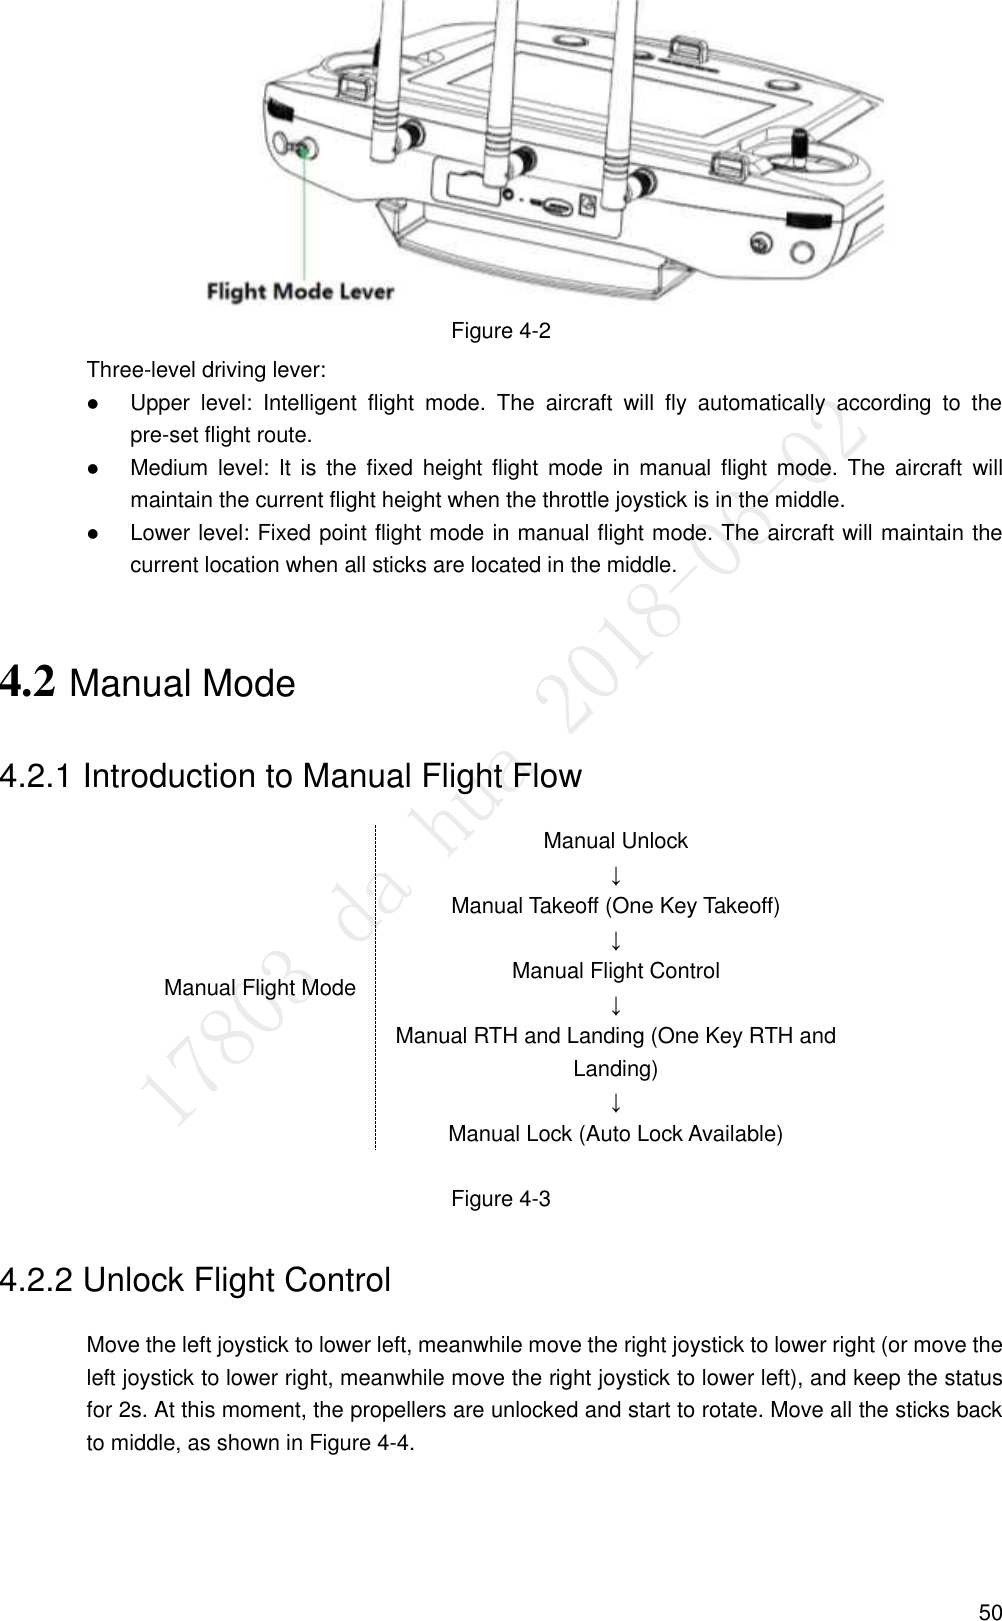  50  Figure 4-2 Three-level driving lever:  Upper  level:  Intelligent  flight  mode.  The  aircraft  will  fly  automatically  according  to  the pre-set flight route.  Medium level:  It  is  the  fixed  height  flight  mode  in  manual flight  mode.  The  aircraft  will maintain the current flight height when the throttle joystick is in the middle.  Lower level: Fixed point flight mode in manual flight mode. The aircraft will maintain the current location when all sticks are located in the middle. 4.2 Manual Mode 4.2.1 Introduction to Manual Flight Flow Manual Flight Mode Manual Unlock ↓ Manual Takeoff (One Key Takeoff) ↓ Manual Flight Control ↓ Manual RTH and Landing (One Key RTH and Landing) ↓ Manual Lock (Auto Lock Available)  Figure 4-3 4.2.2 Unlock Flight Control Move the left joystick to lower left, meanwhile move the right joystick to lower right (or move the left joystick to lower right, meanwhile move the right joystick to lower left), and keep the status for 2s. At this moment, the propellers are unlocked and start to rotate. Move all the sticks back to middle, as shown in Figure 4-4. 